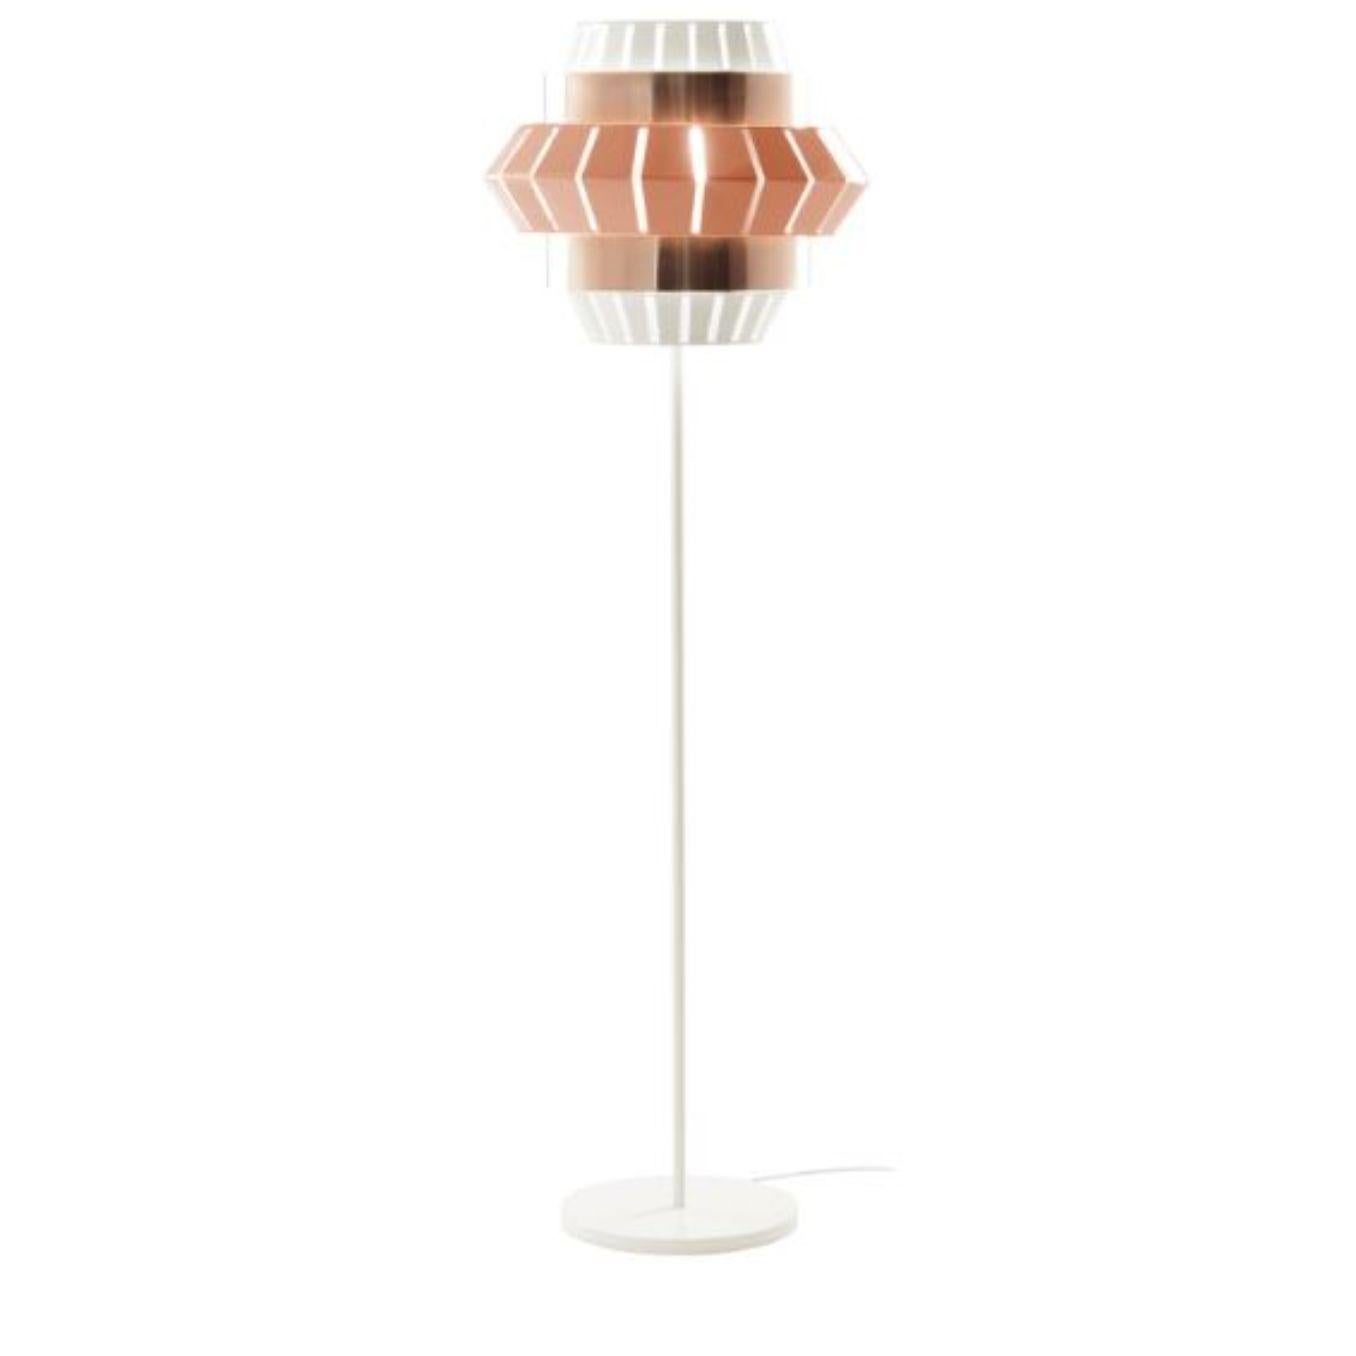 Ivory and Salmon comb floor lamp with copper ring by Dooq
Dimensions: W 54 x D 54 x H 175 cm
Materials: lacquered metal, polished copper.
Also available in different colors and materials.

Information:
230V/50Hz
E27/1x20W LED
120V/60Hz
E26/1x15W